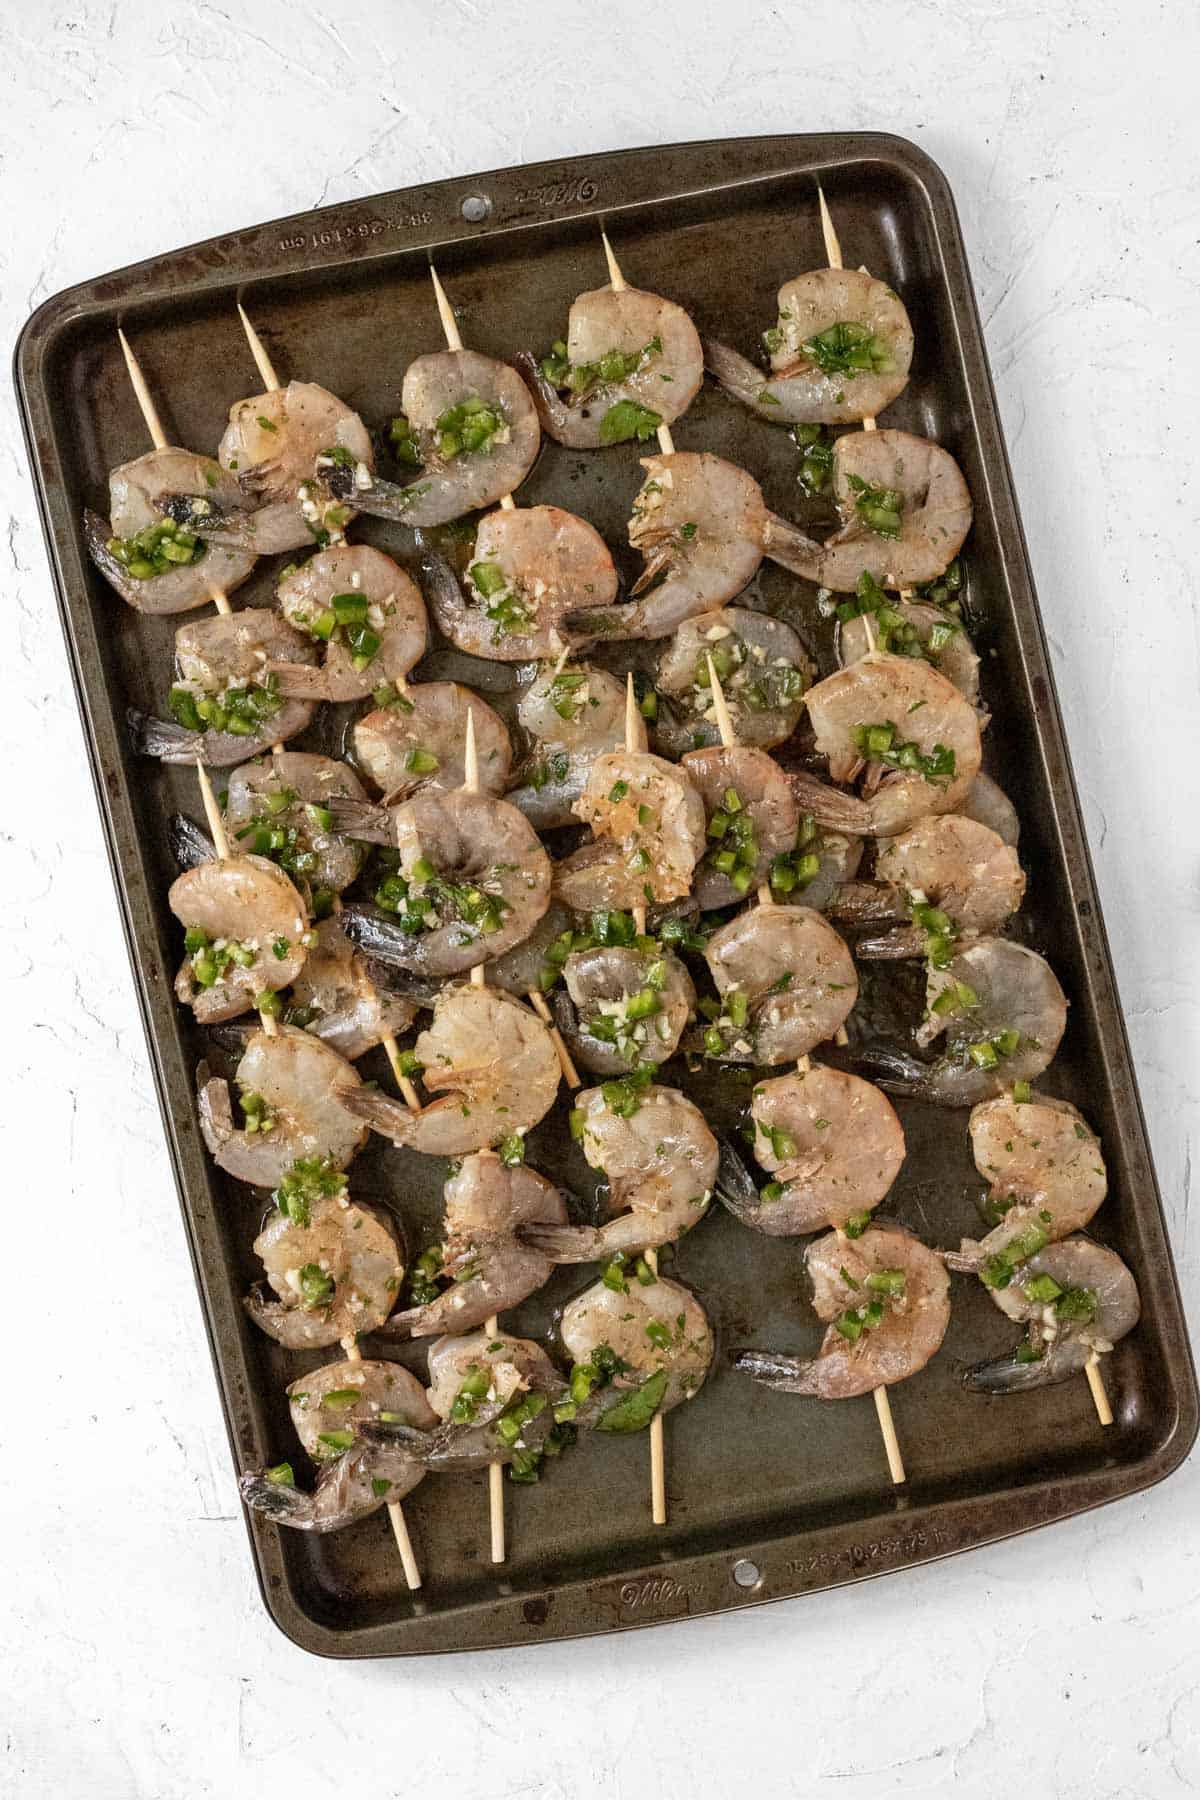 Raw marinated shrimp on skewers on a sheet pan.